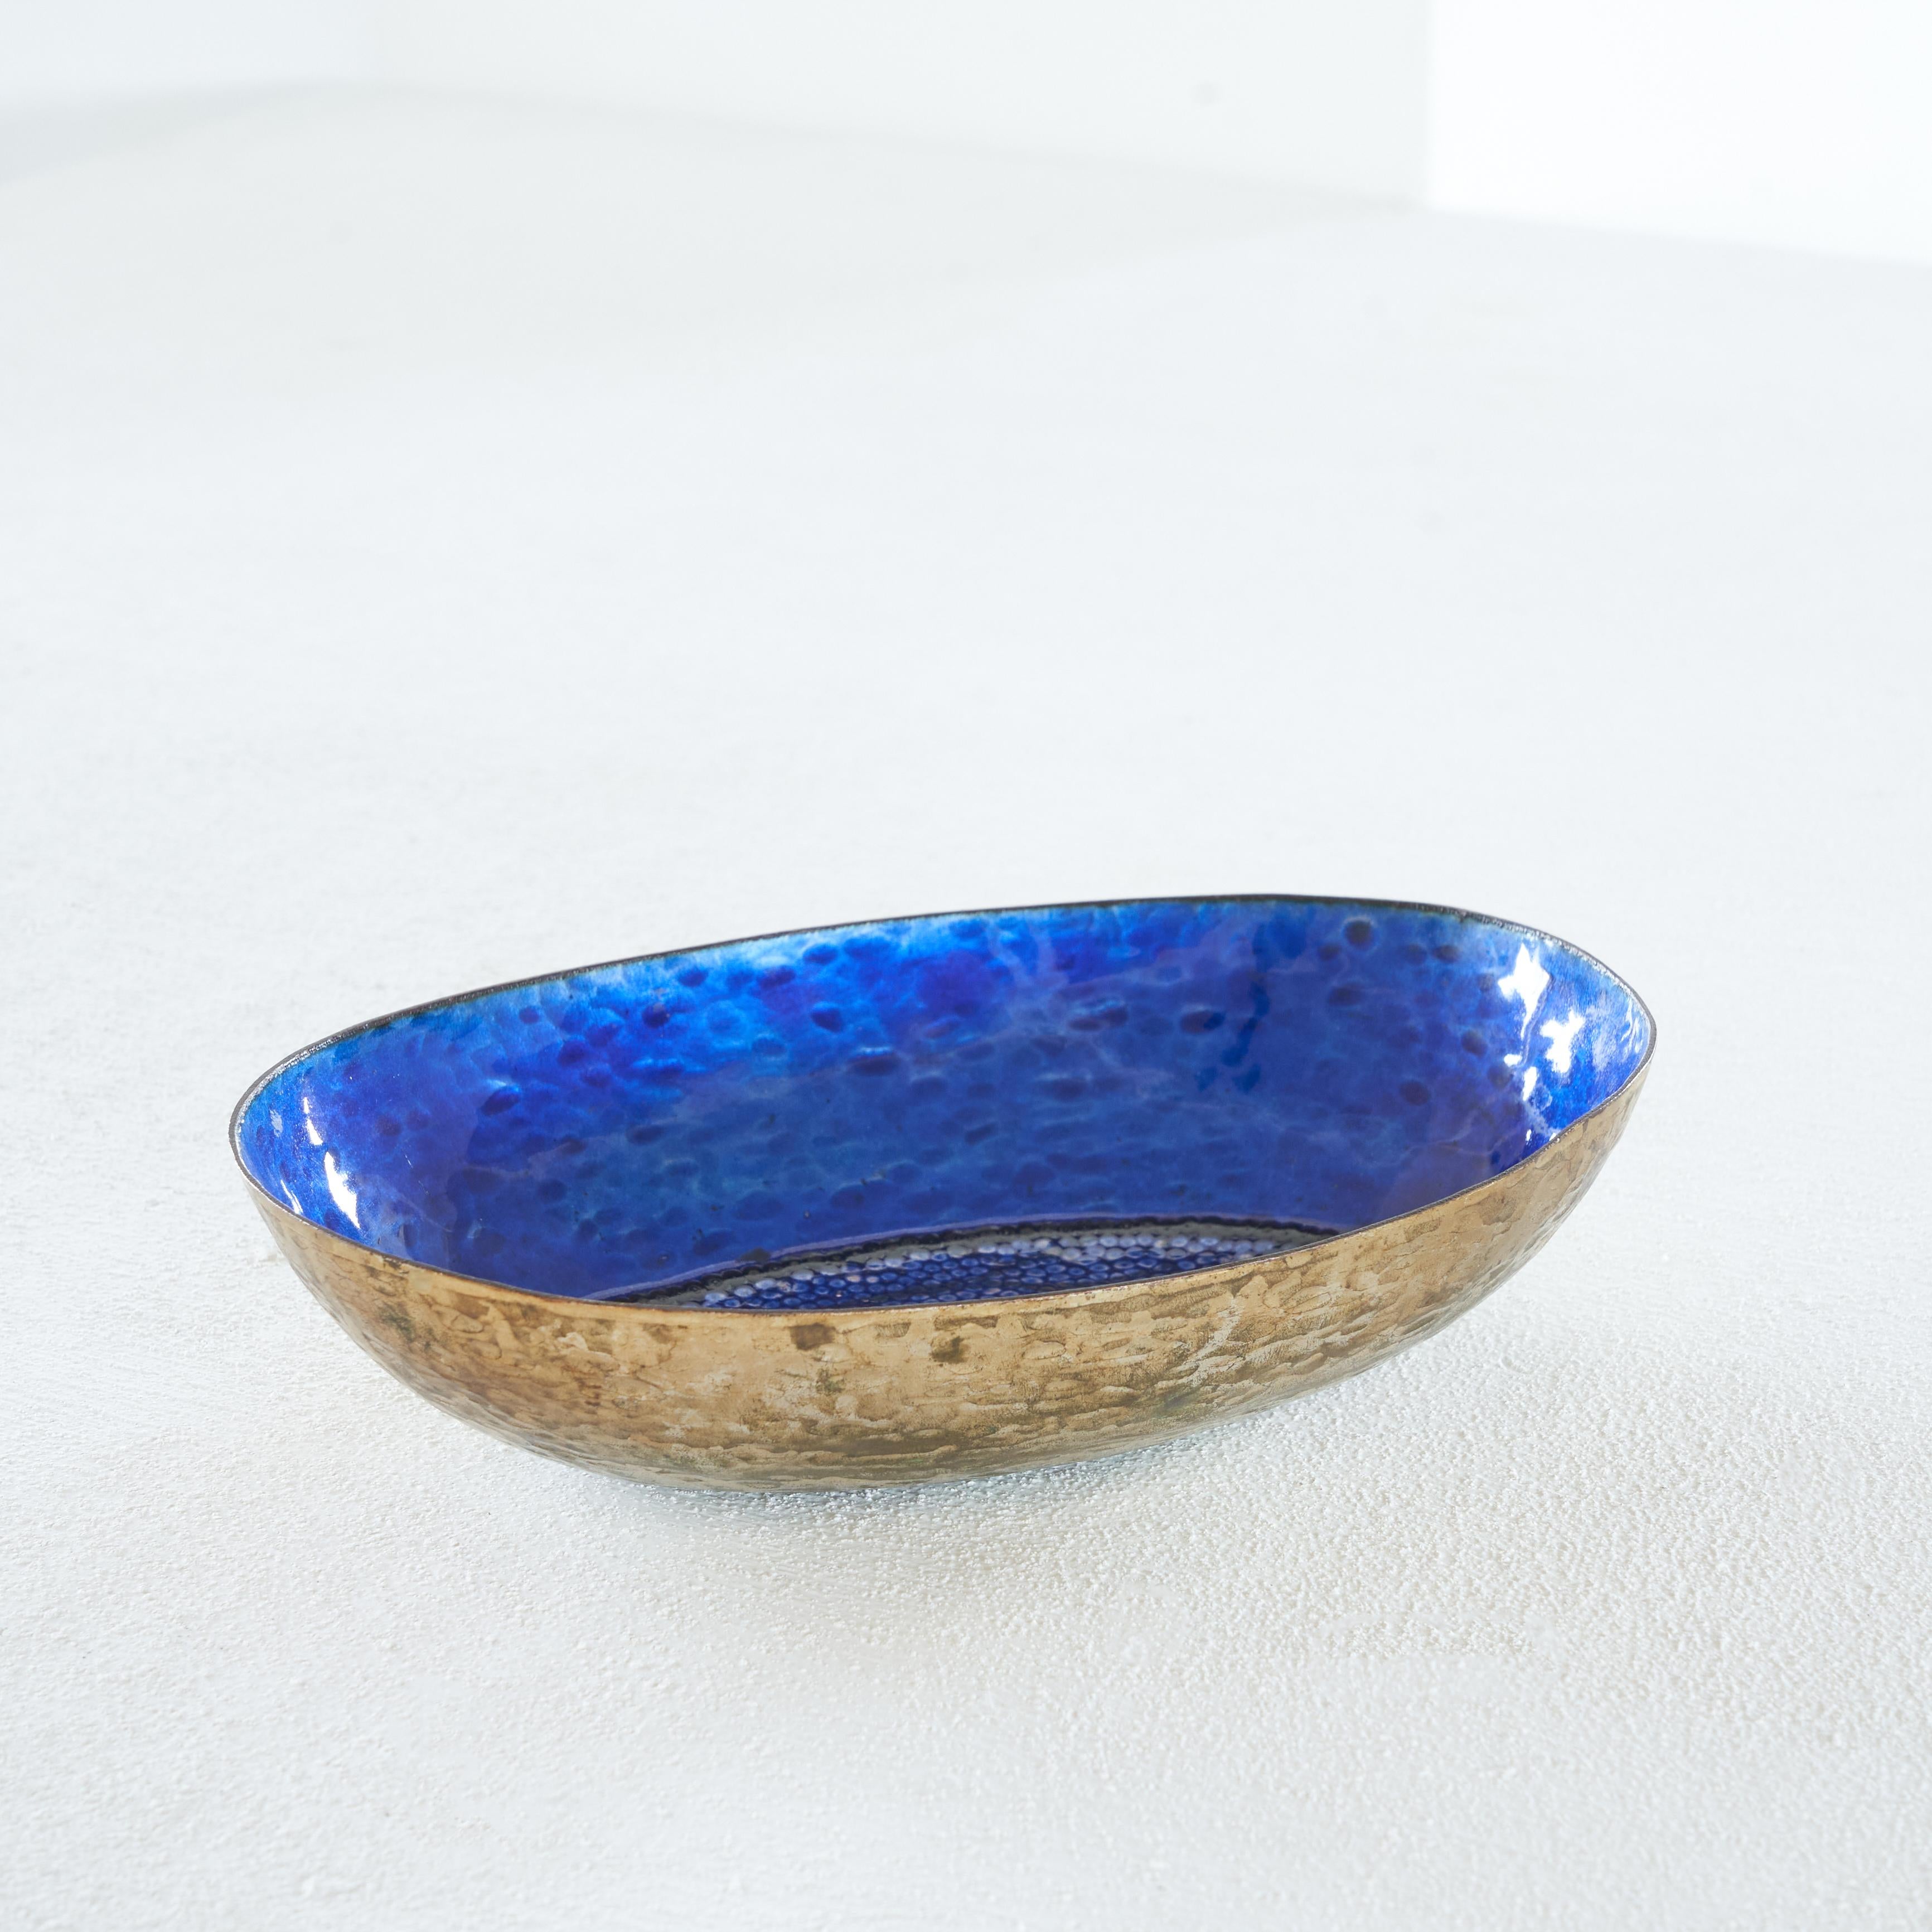 Valenti hand hammered and enameled bowl, Padova, Italy, 1960s.

A mesmerizing enamel bowl by Valenti from the city of Padova (Padua) in Italy. It is a wonderfully thin and delicate enameled copper bowl in blue. The enamel has beautiful tones of